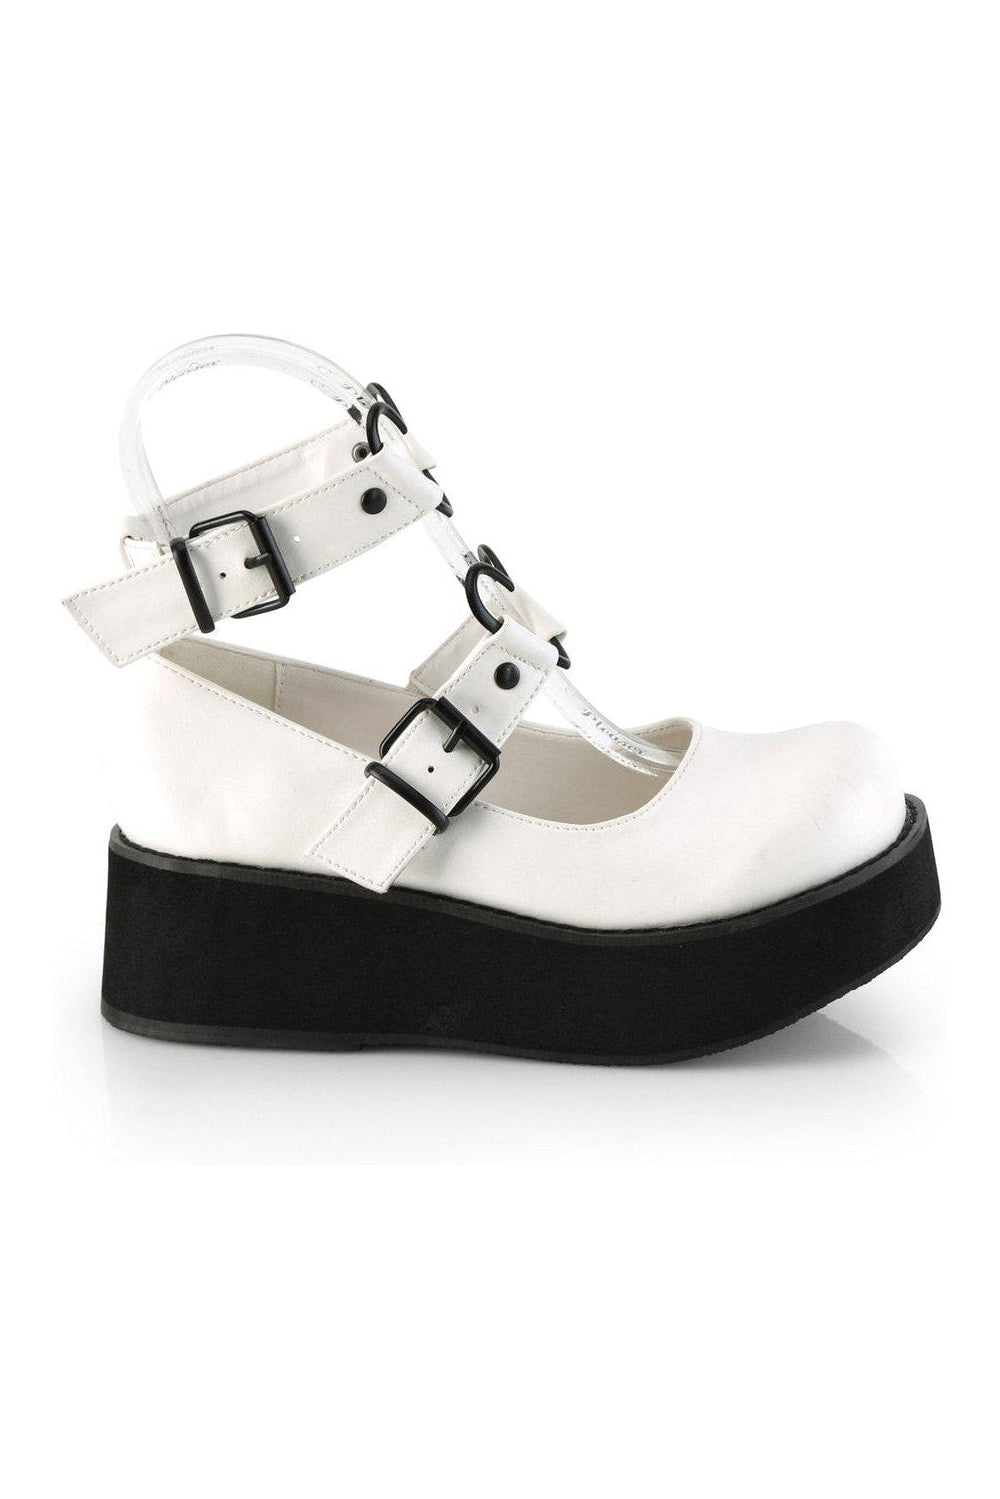 SPRITE-02 Mary Jane | White Faux Leather-Mary Janes-Demonia-SEXYSHOES.COM